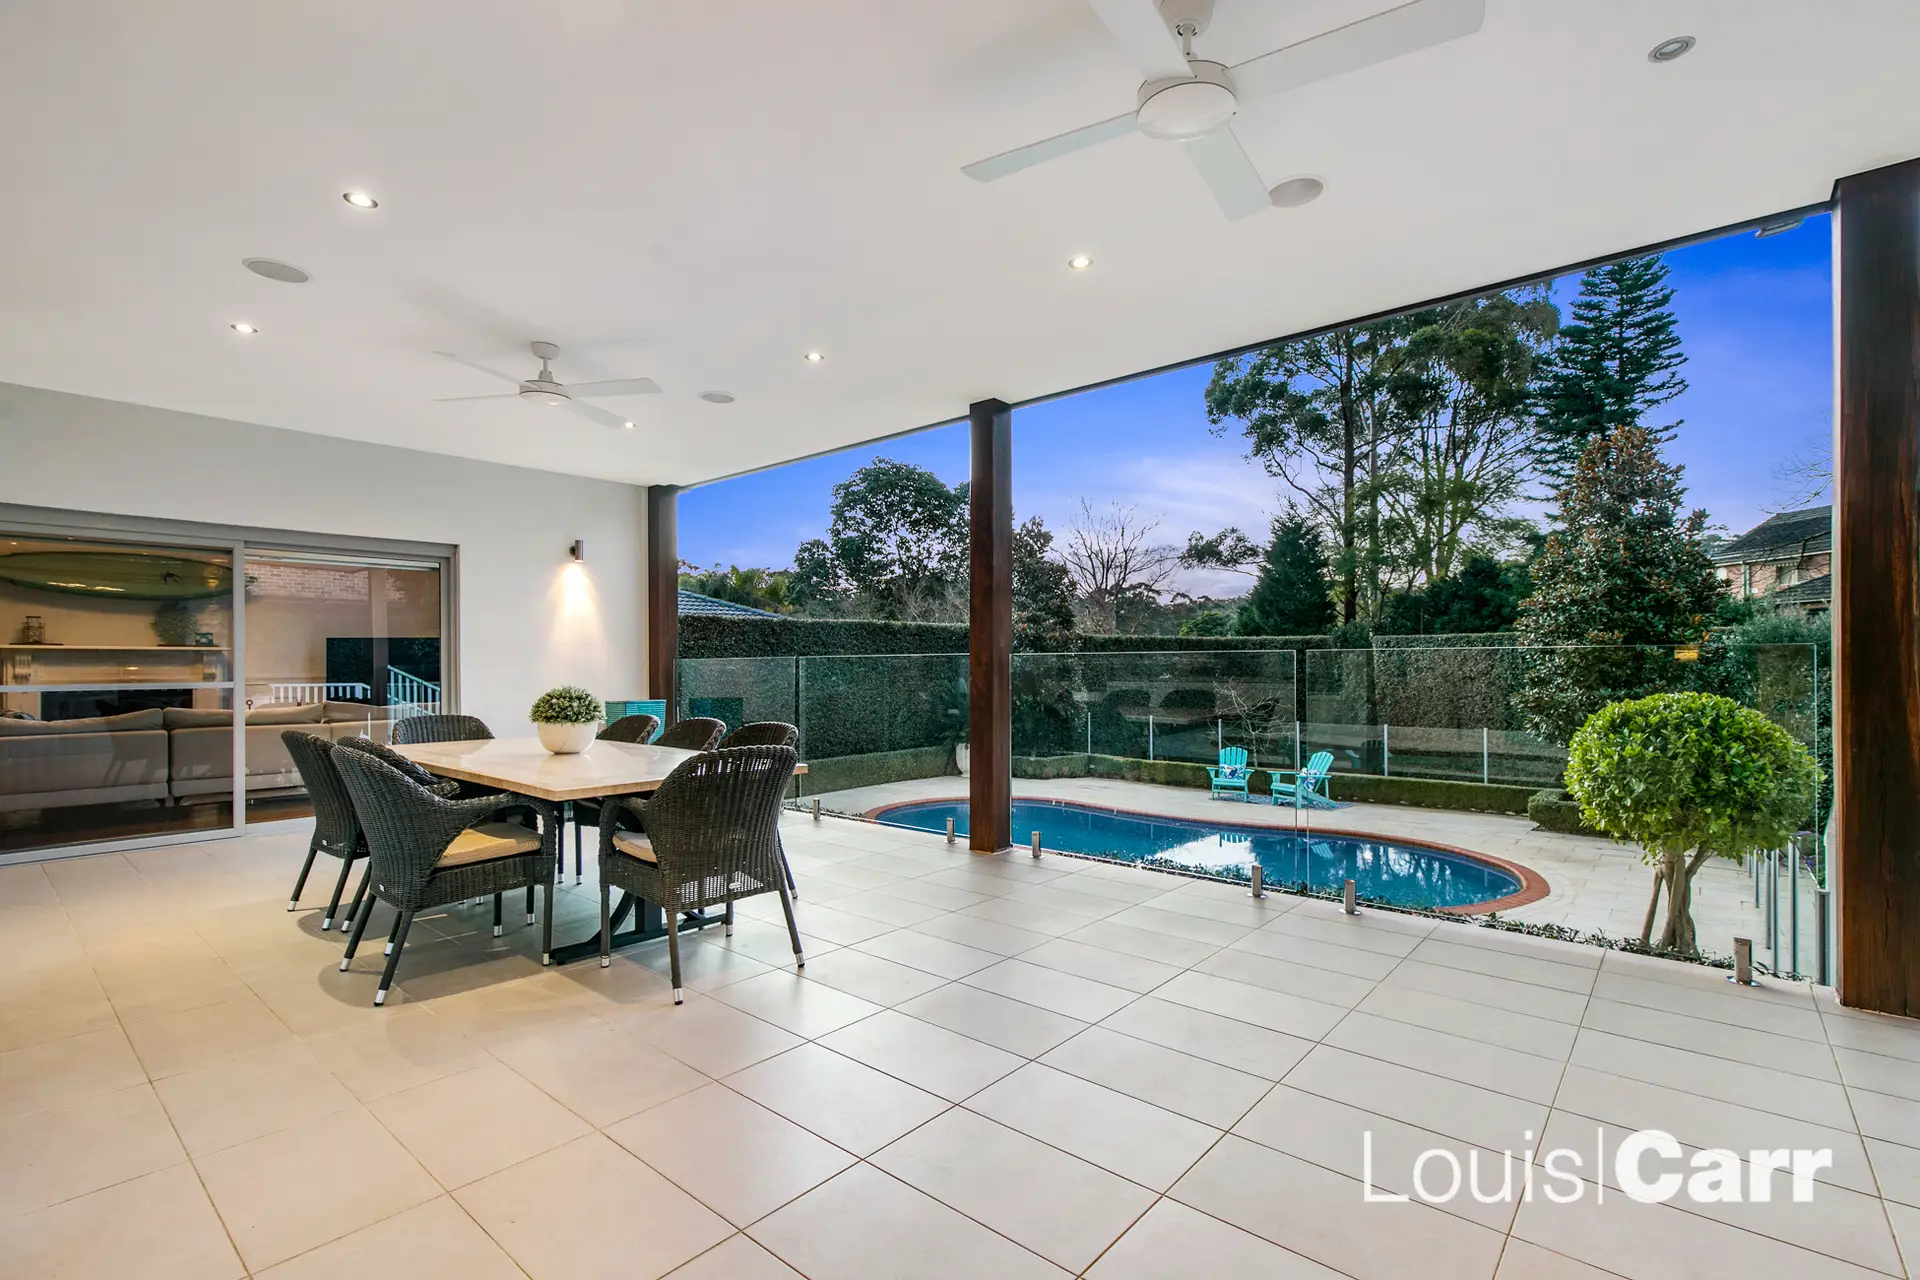 Photo #11: 16 Bellbird Drive, West Pennant Hills - Sold by Louis Carr Real Estate